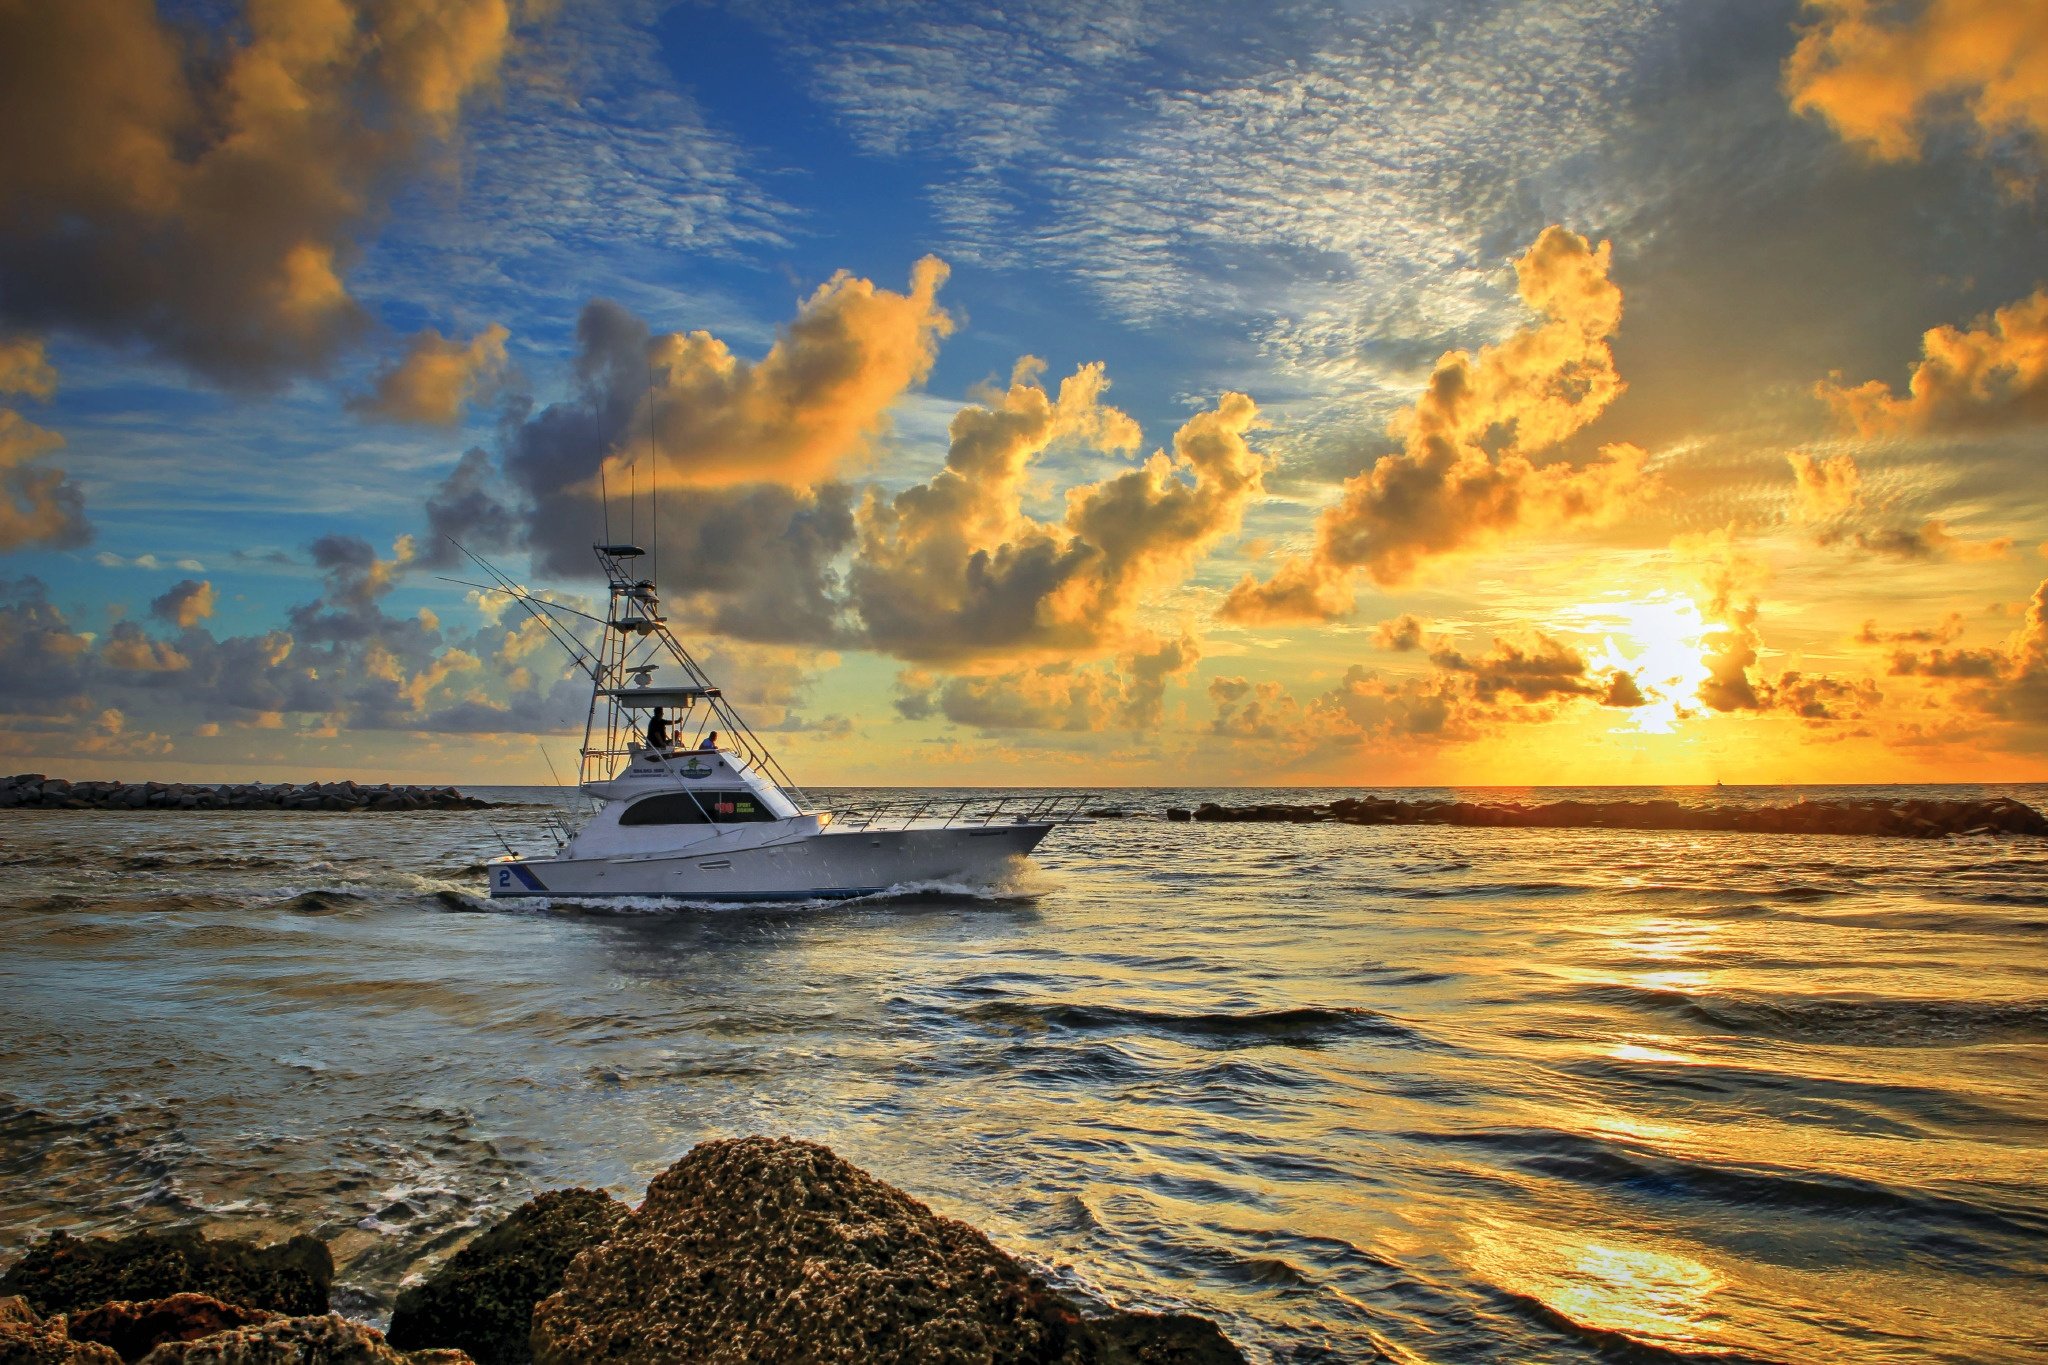 A252-Boat-Going-Fishing-During-Sunrise-at-the-Pompano-Inlet-Florida-Original_preview.jpg